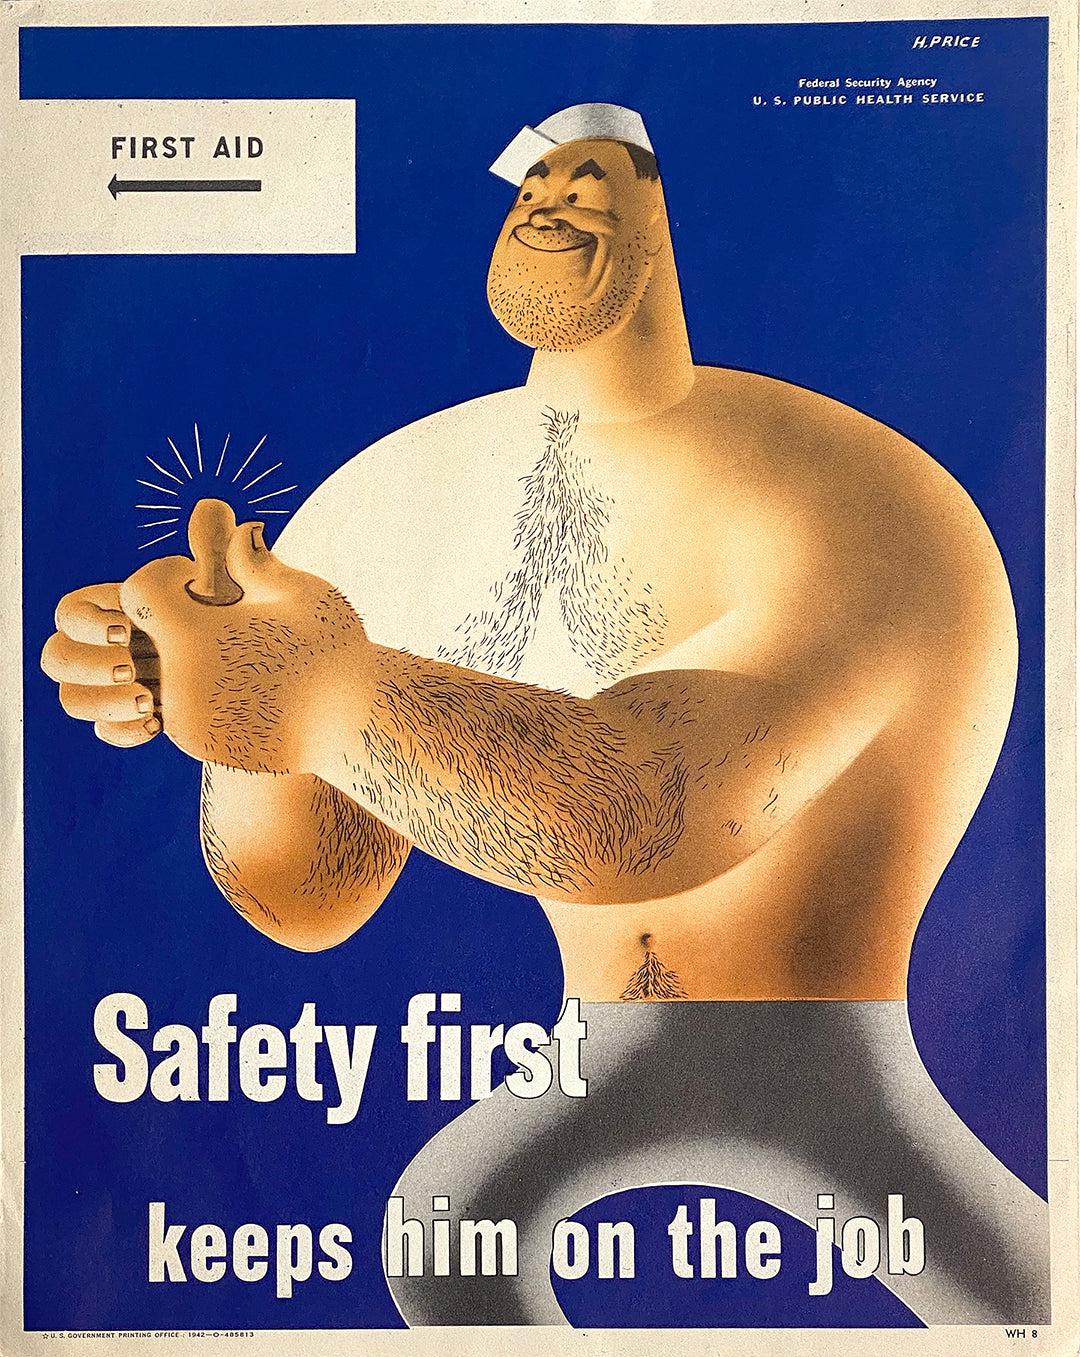 Original Vintage WWII Poster Safety First Keeps Him on the Job by Price